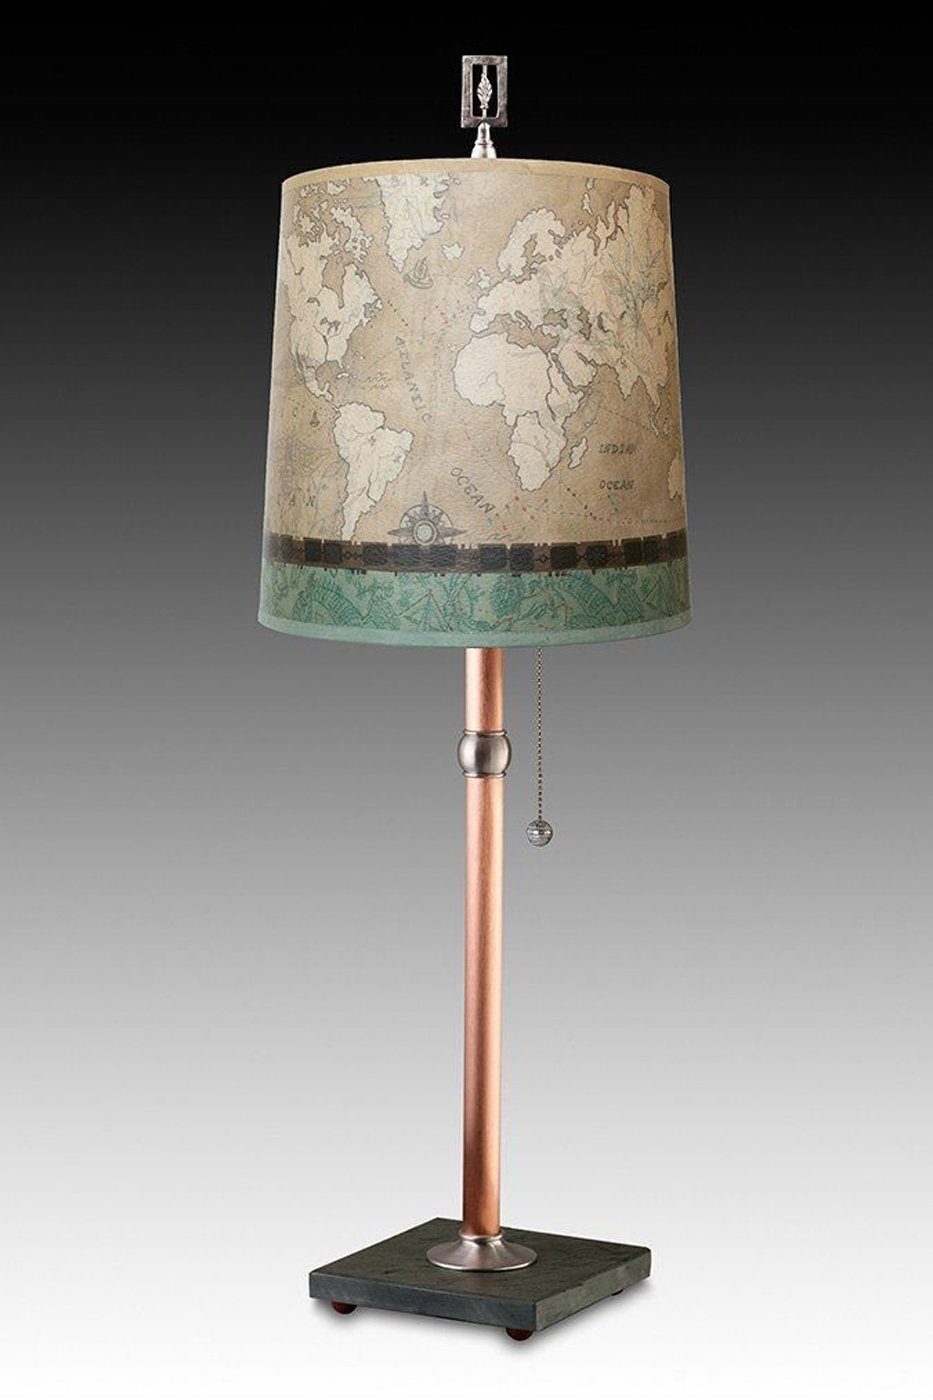 Janna Ugone & Co Table Lamps Copper Table Lamp with Medium Drum Shade in Voyages